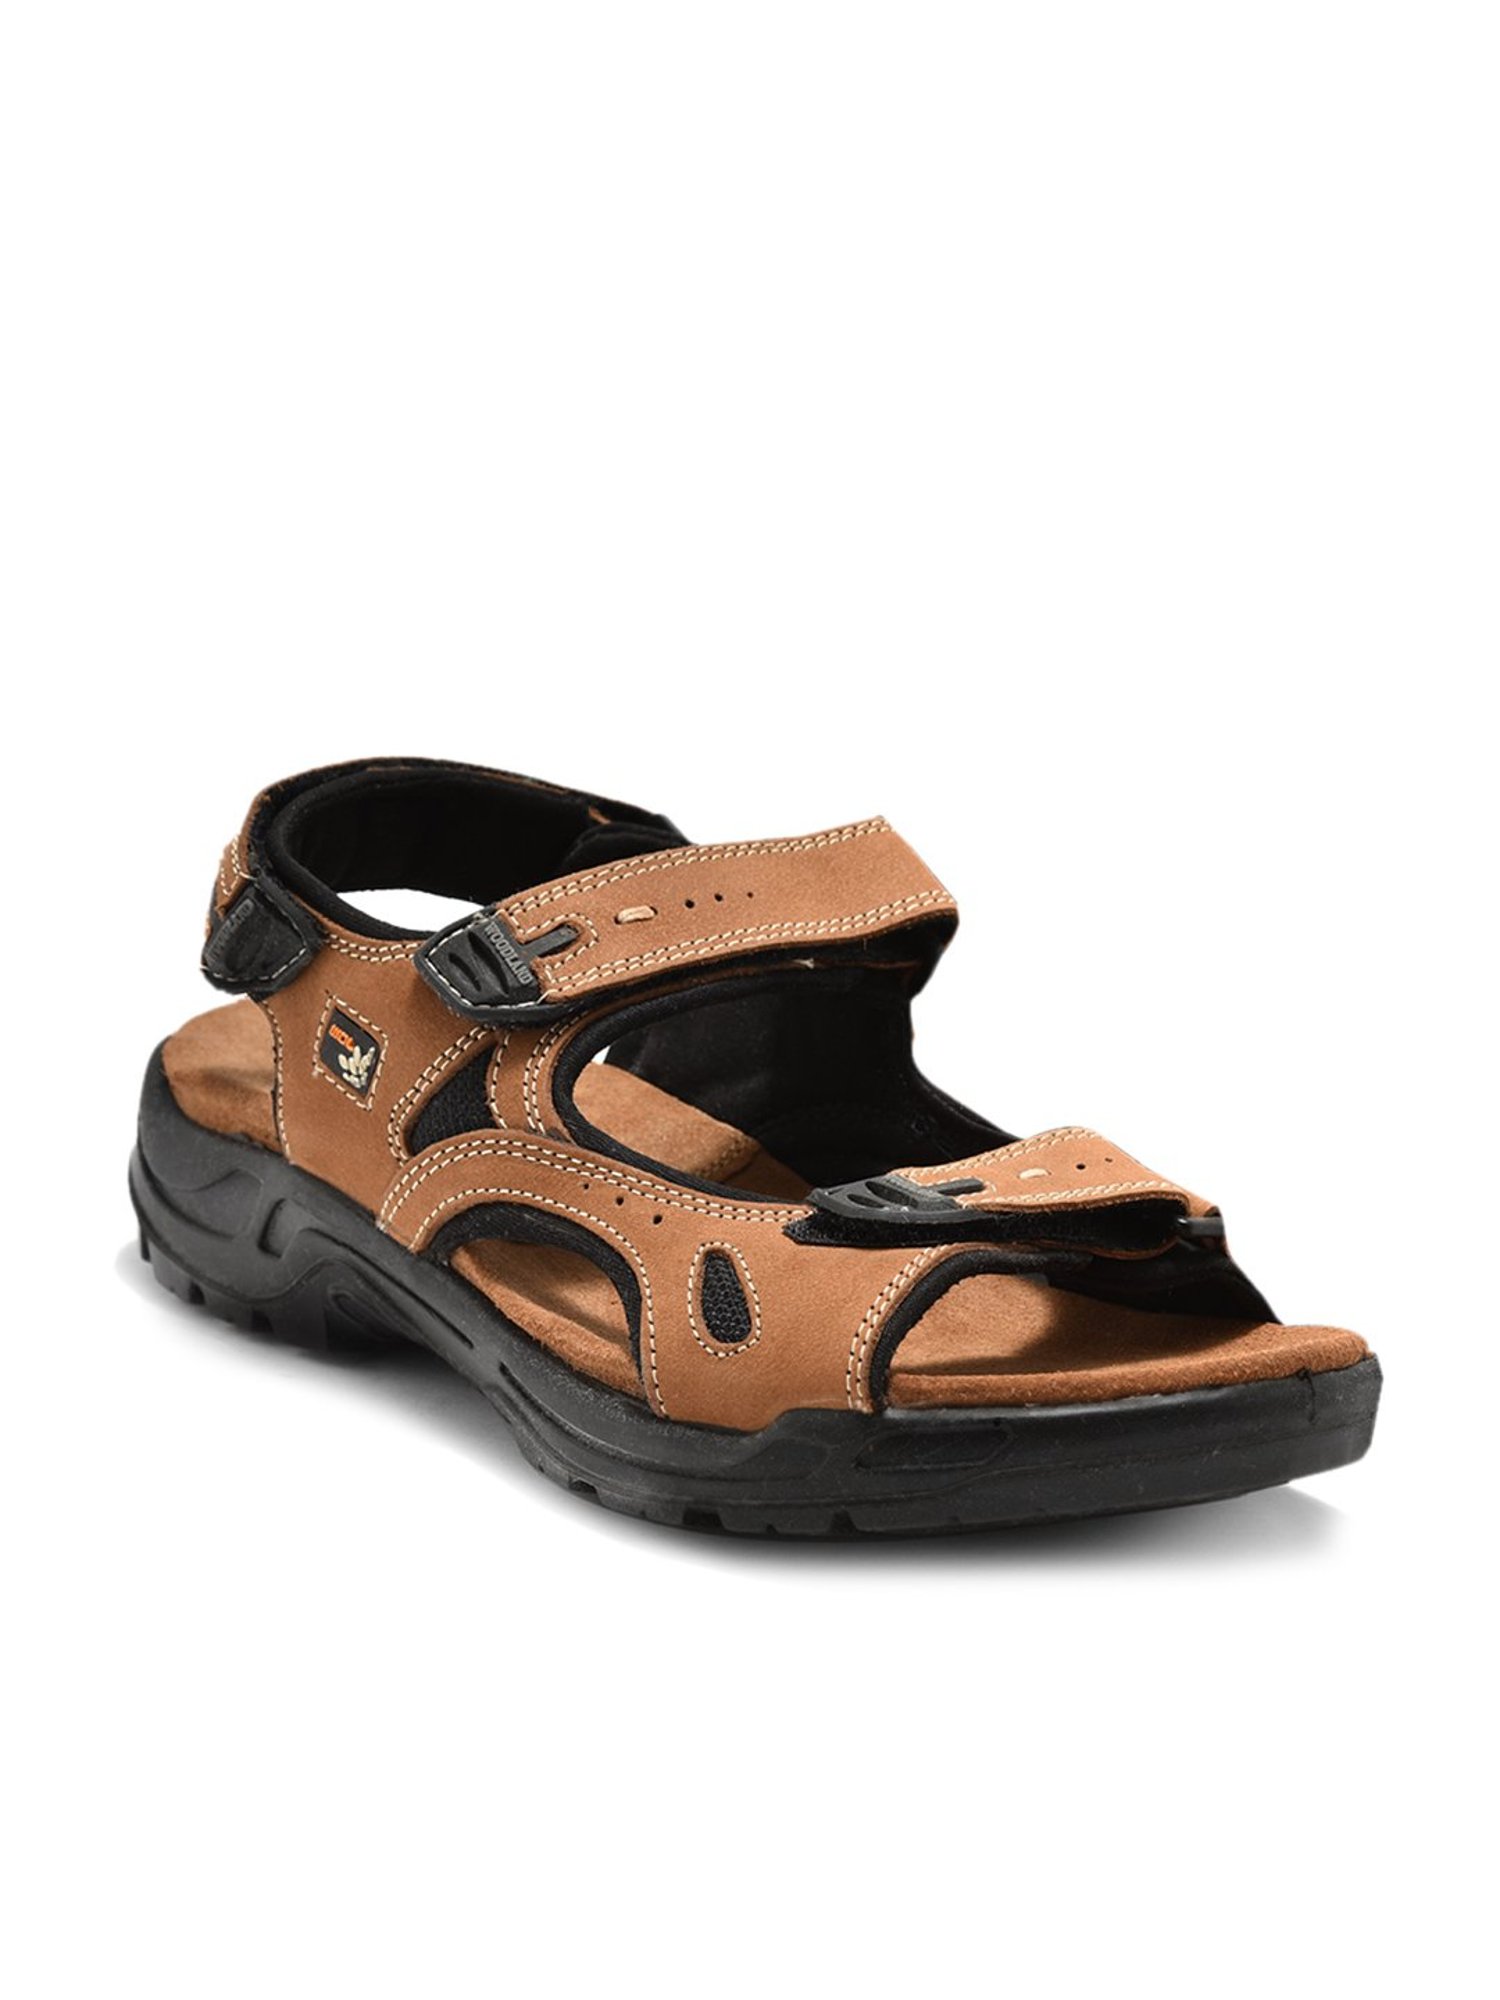 Leather Woodland Mens Sandals 12 % off, Slides, Casual Wear at Rs 2987/pair  in Latur